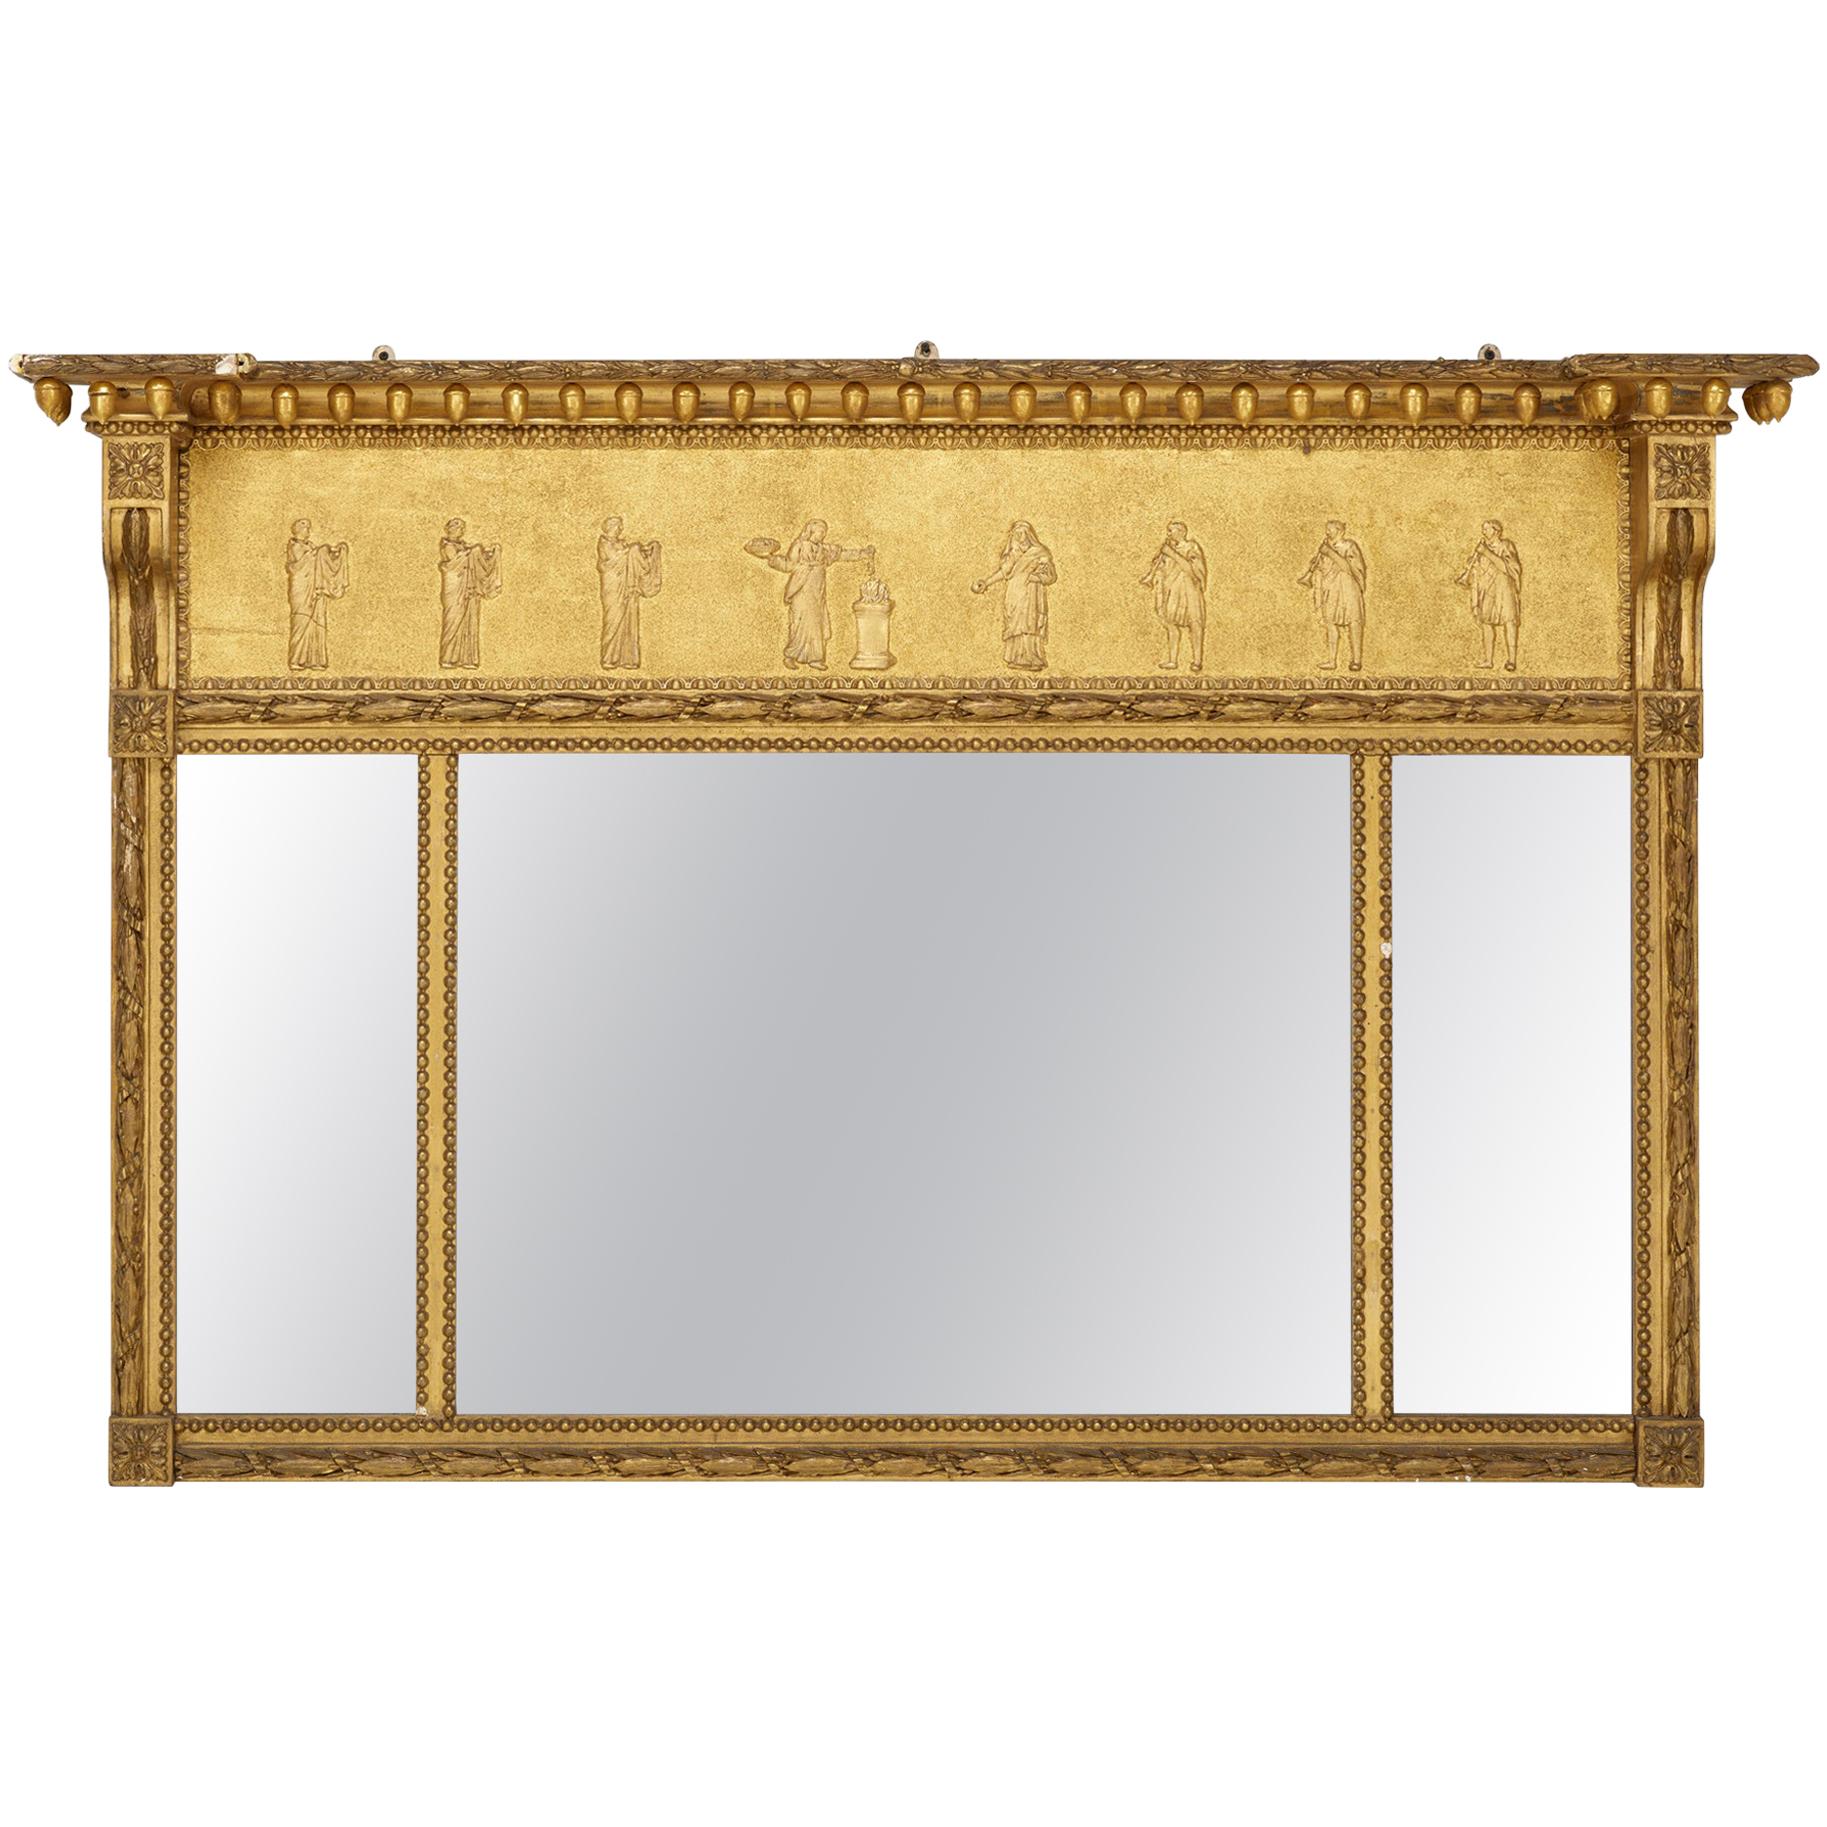 Regency Revival Carved and Giltwood Pier Mirror, Glass, circa 1945